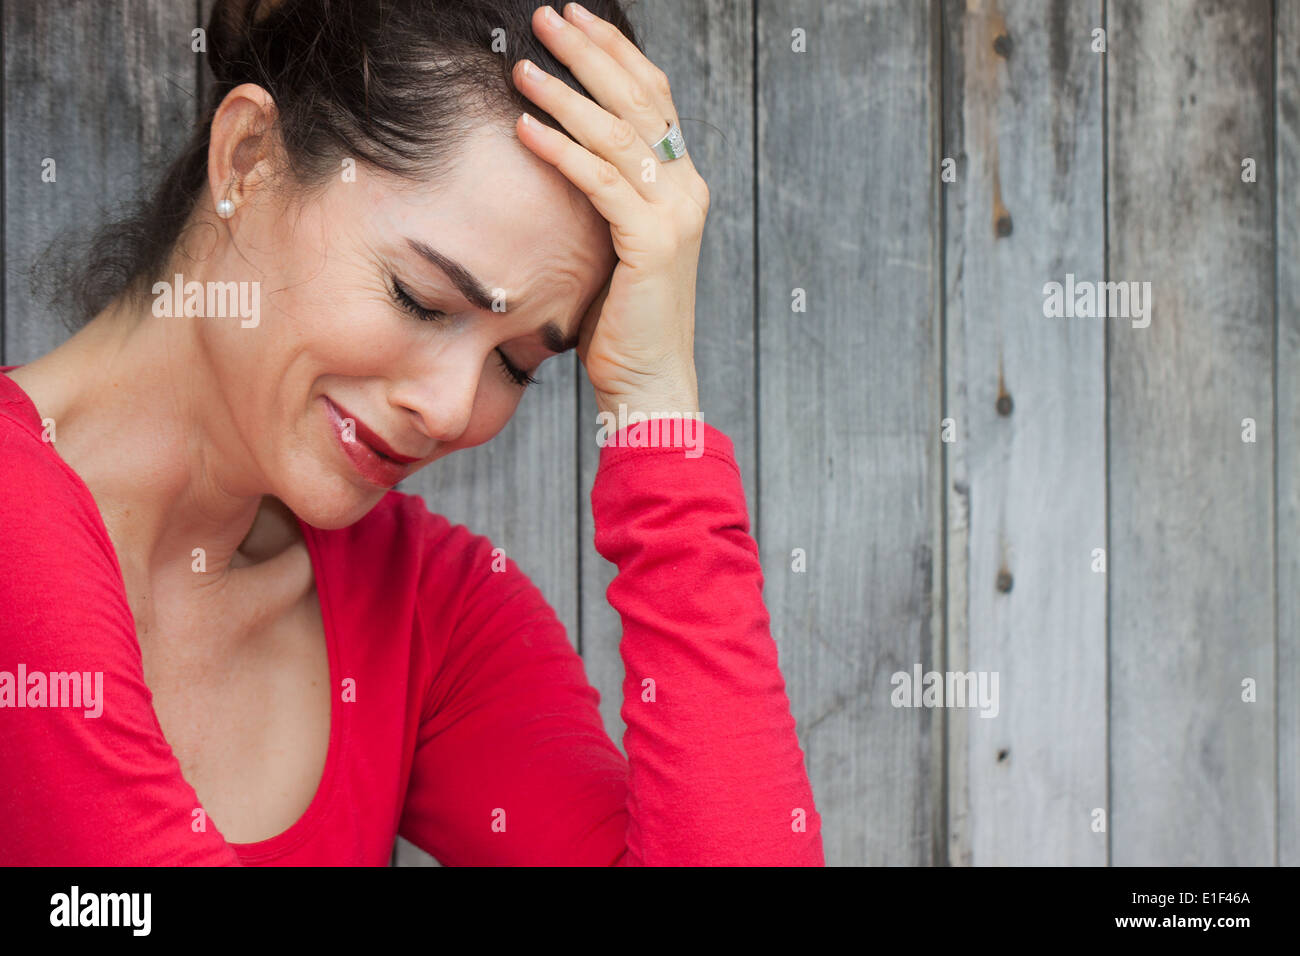 A very upset and lonely woman sitting down crying against a wall Stock Photo